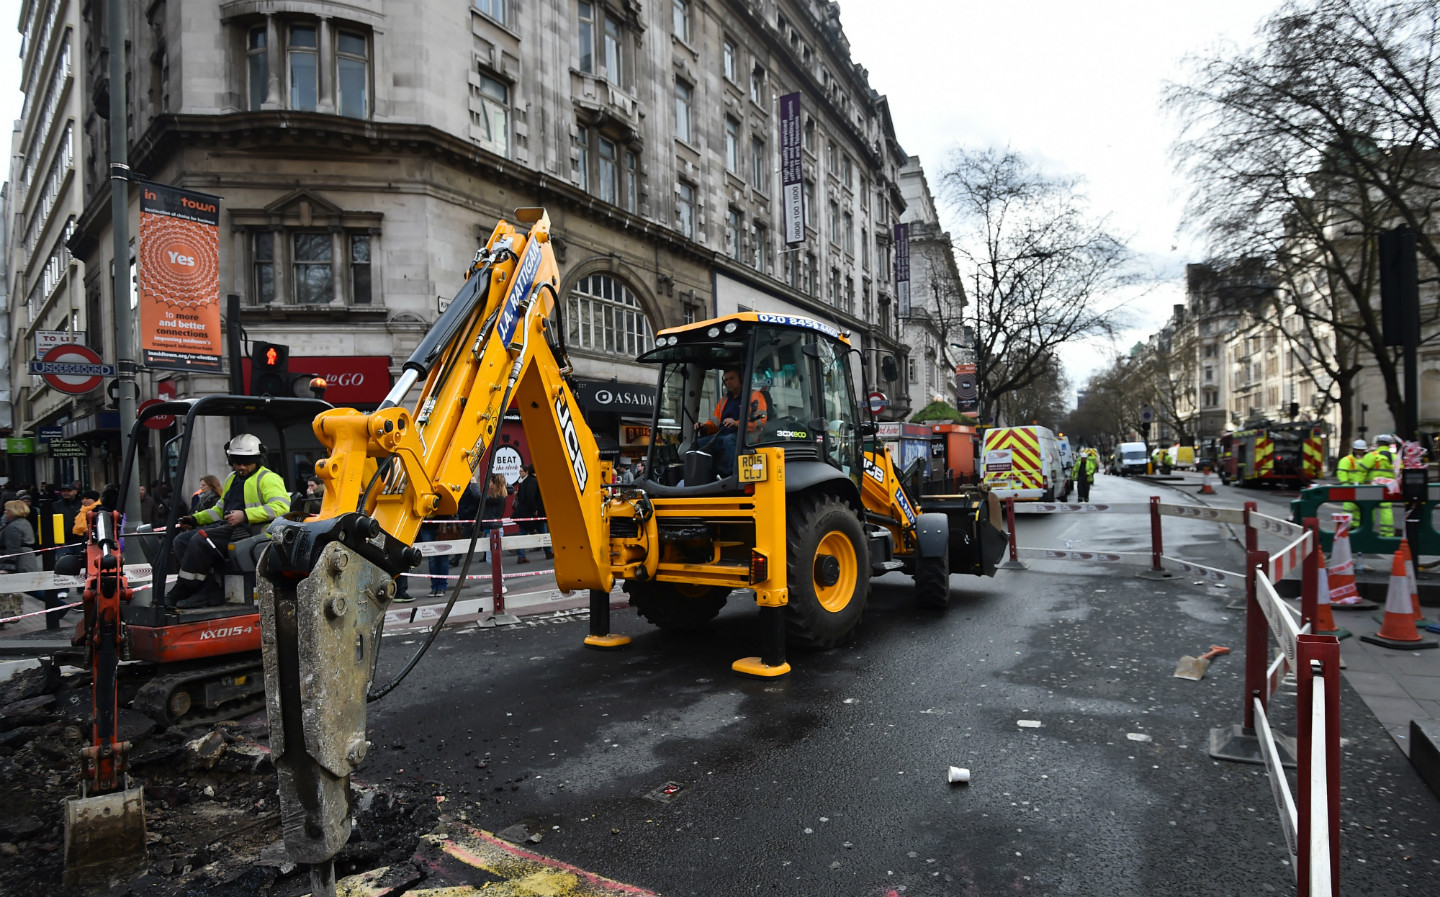 Fine mess: new £2500 penalty reduces roadwork delays